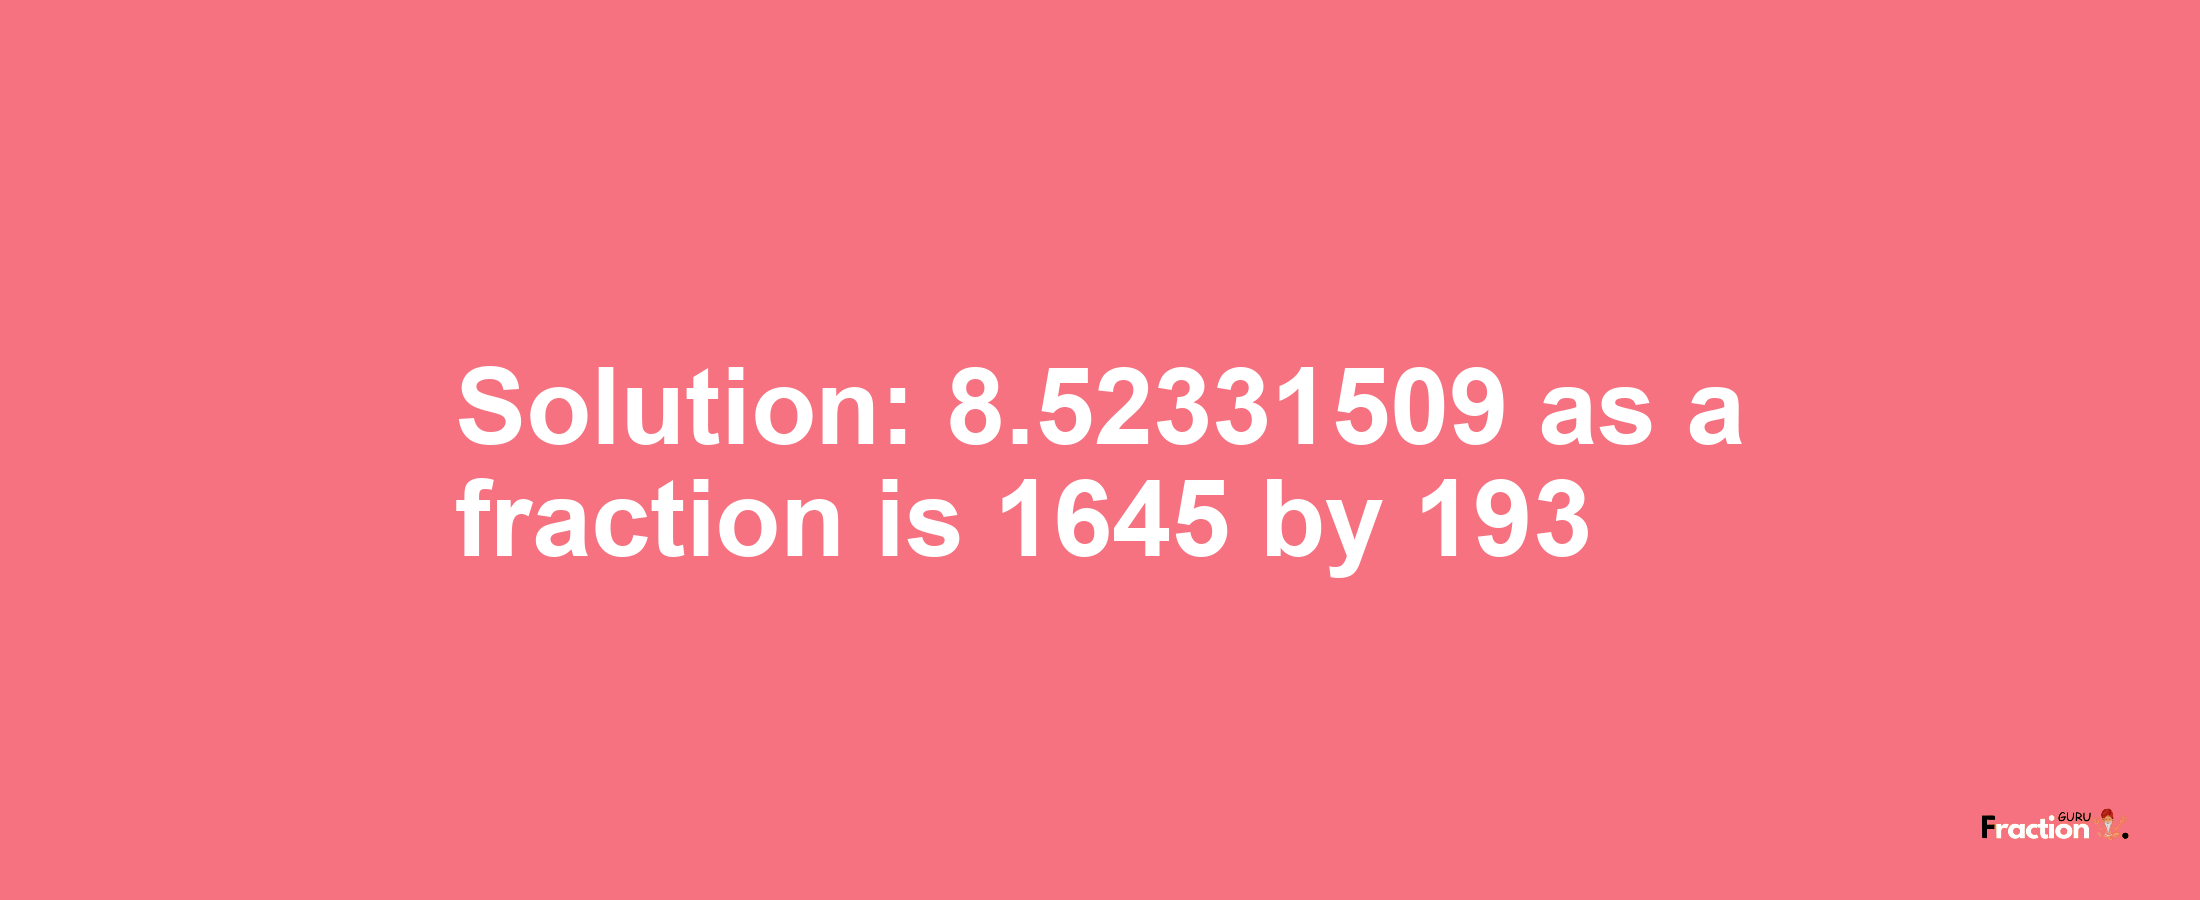 Solution:8.52331509 as a fraction is 1645/193